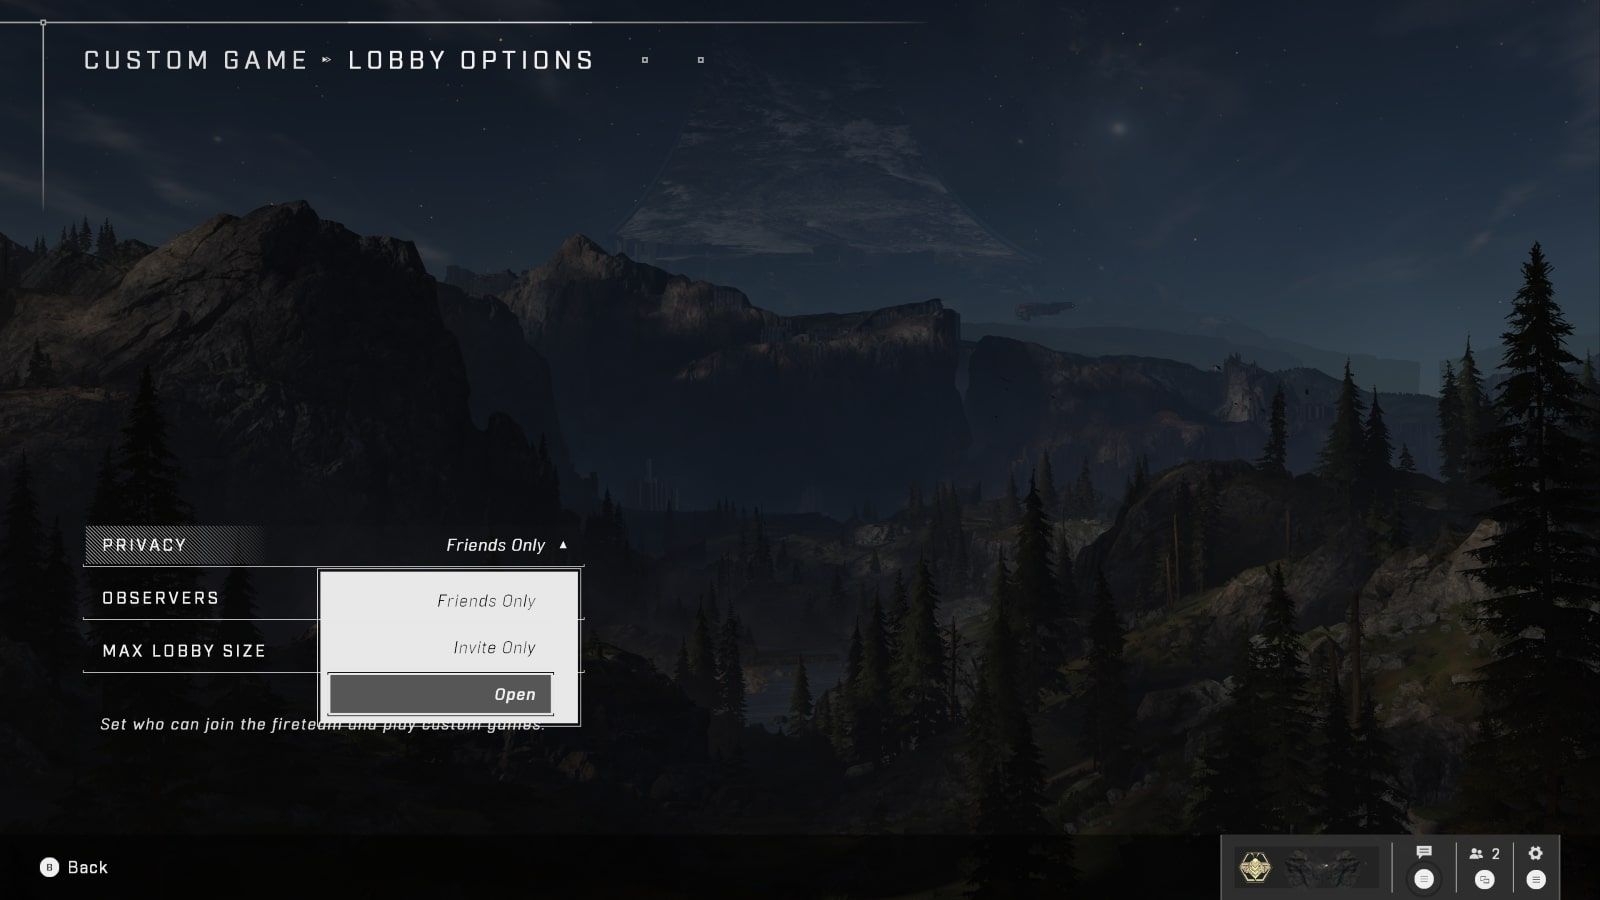 A screenshot of the lobby options for a custom game in Halo Infinite with Privacy and Open highlighted 